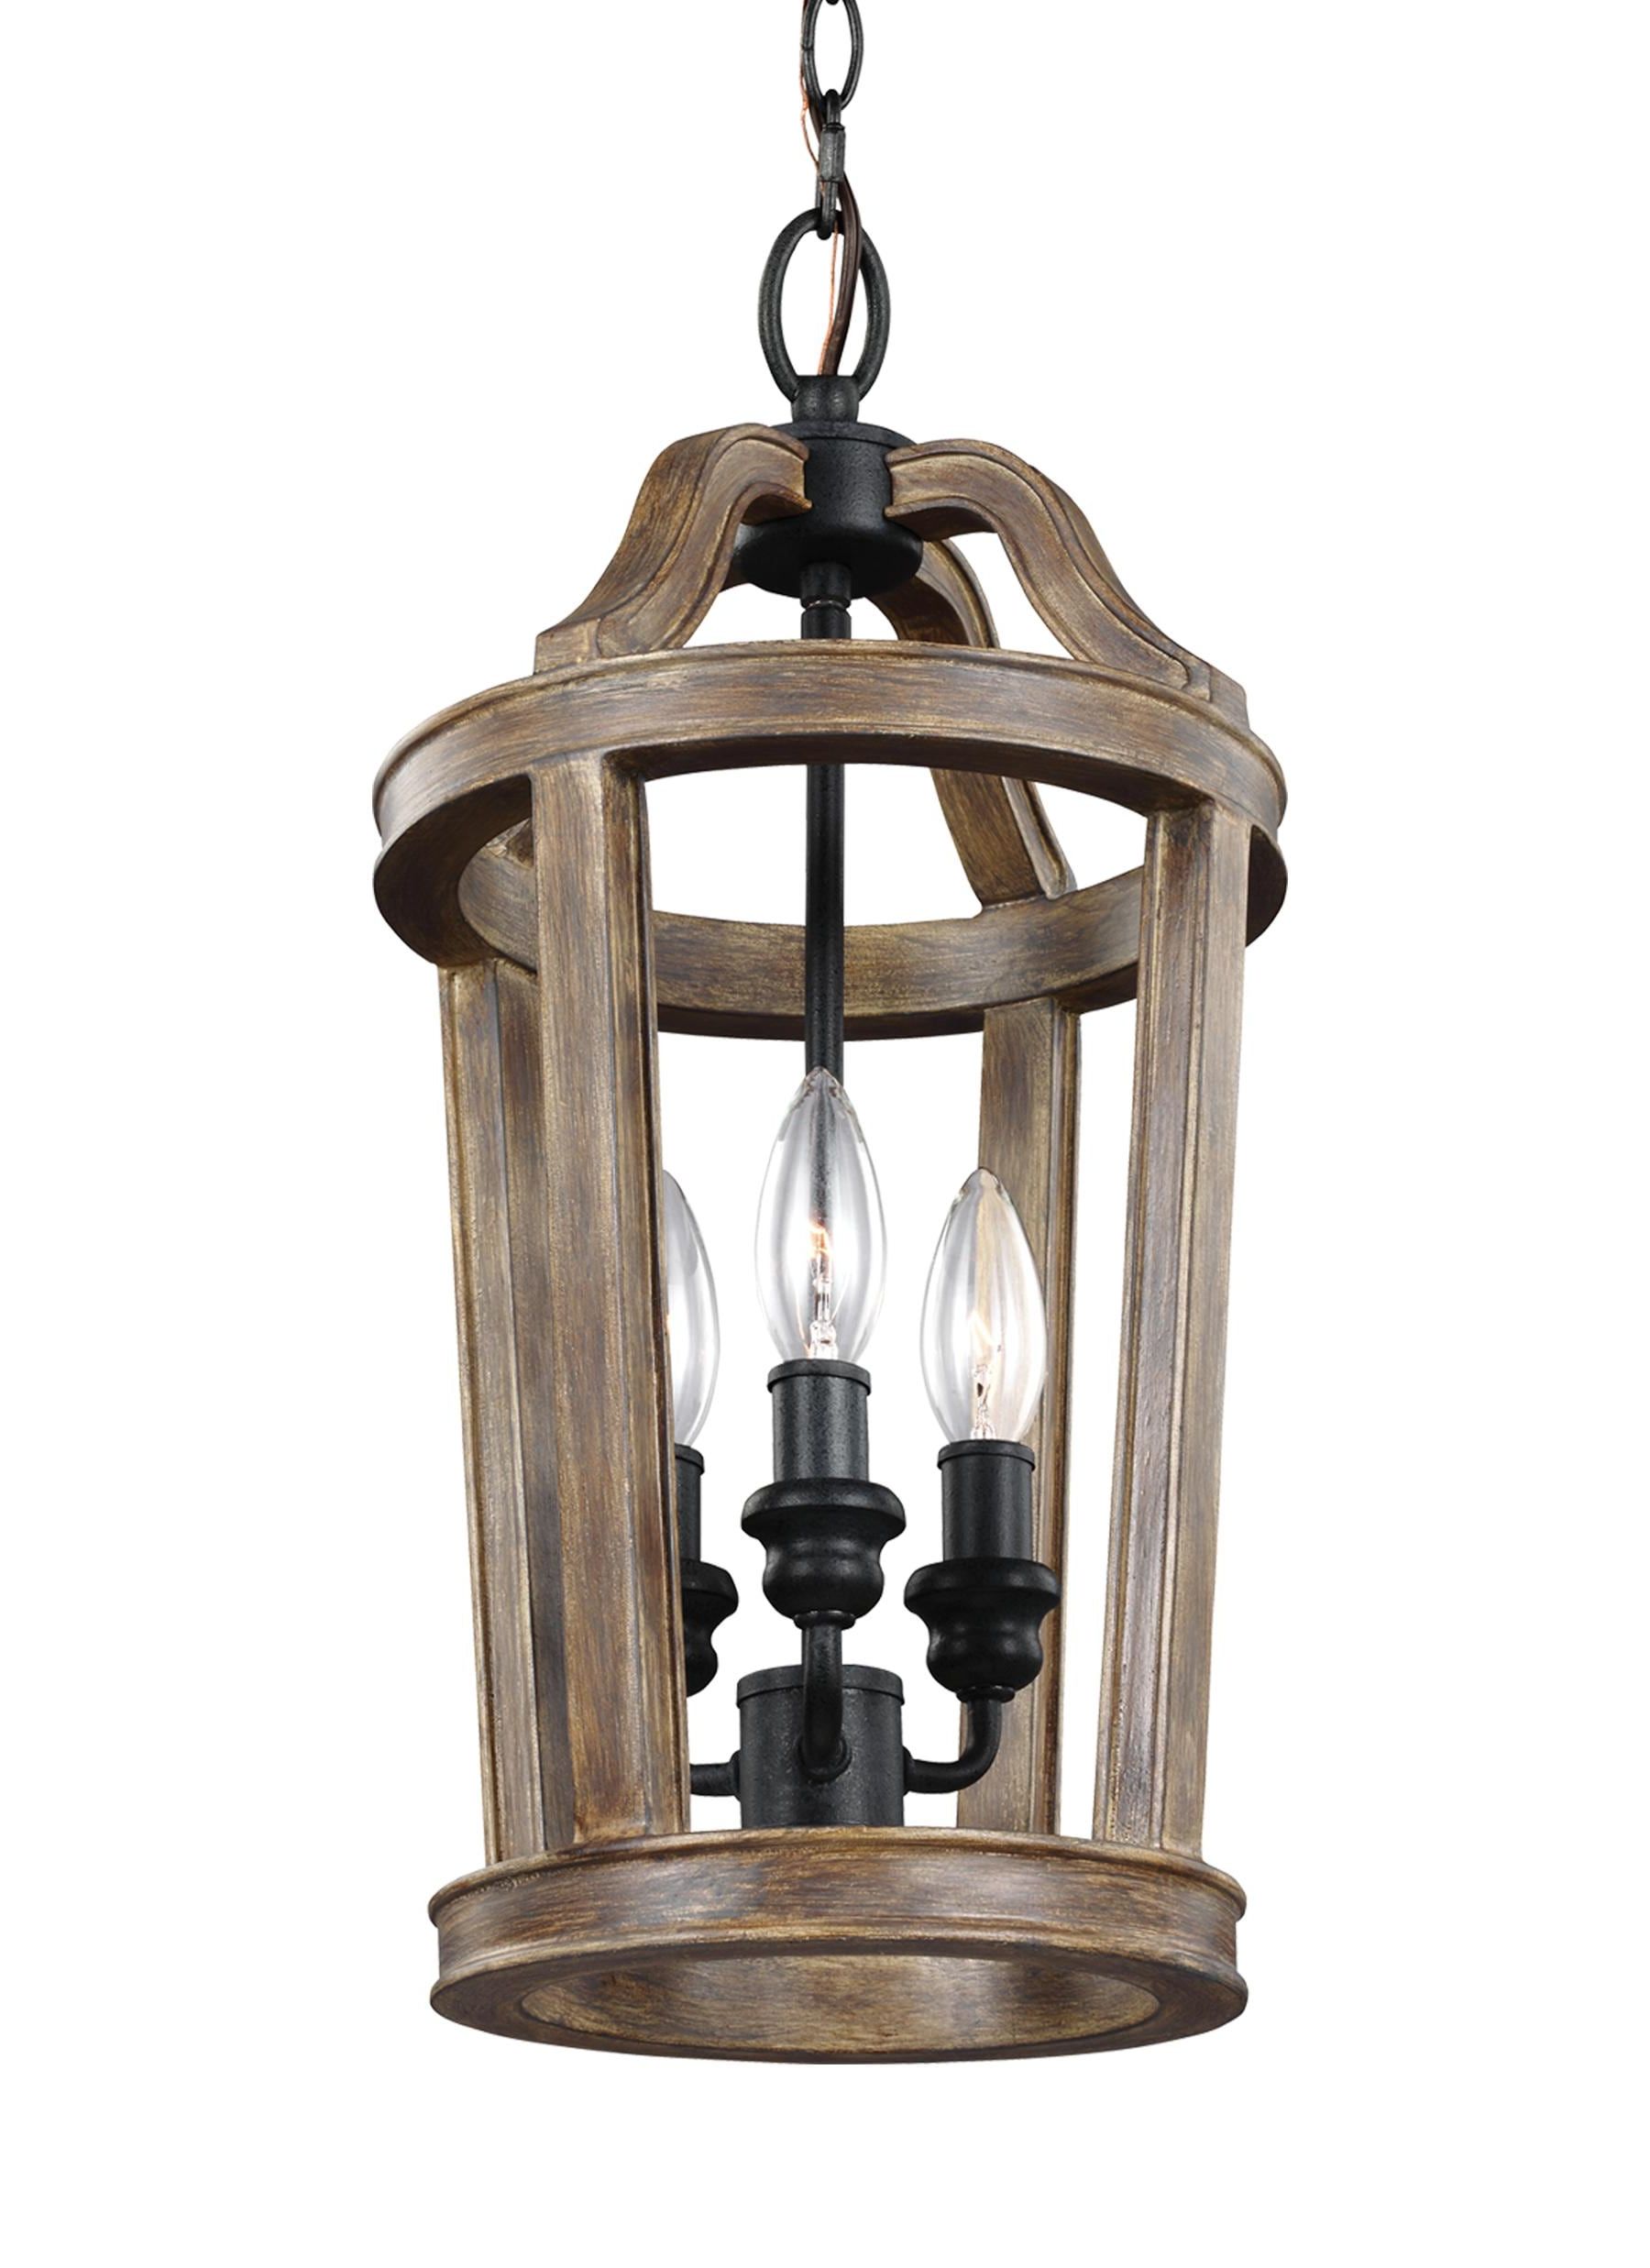 Fashionable Feiss Lorenz 3 Light Weathered Oak Wood Transitional Lantern Pendant Light  At Lowes Intended For Weathered Oak Wood Lantern Chandeliers (View 5 of 10)